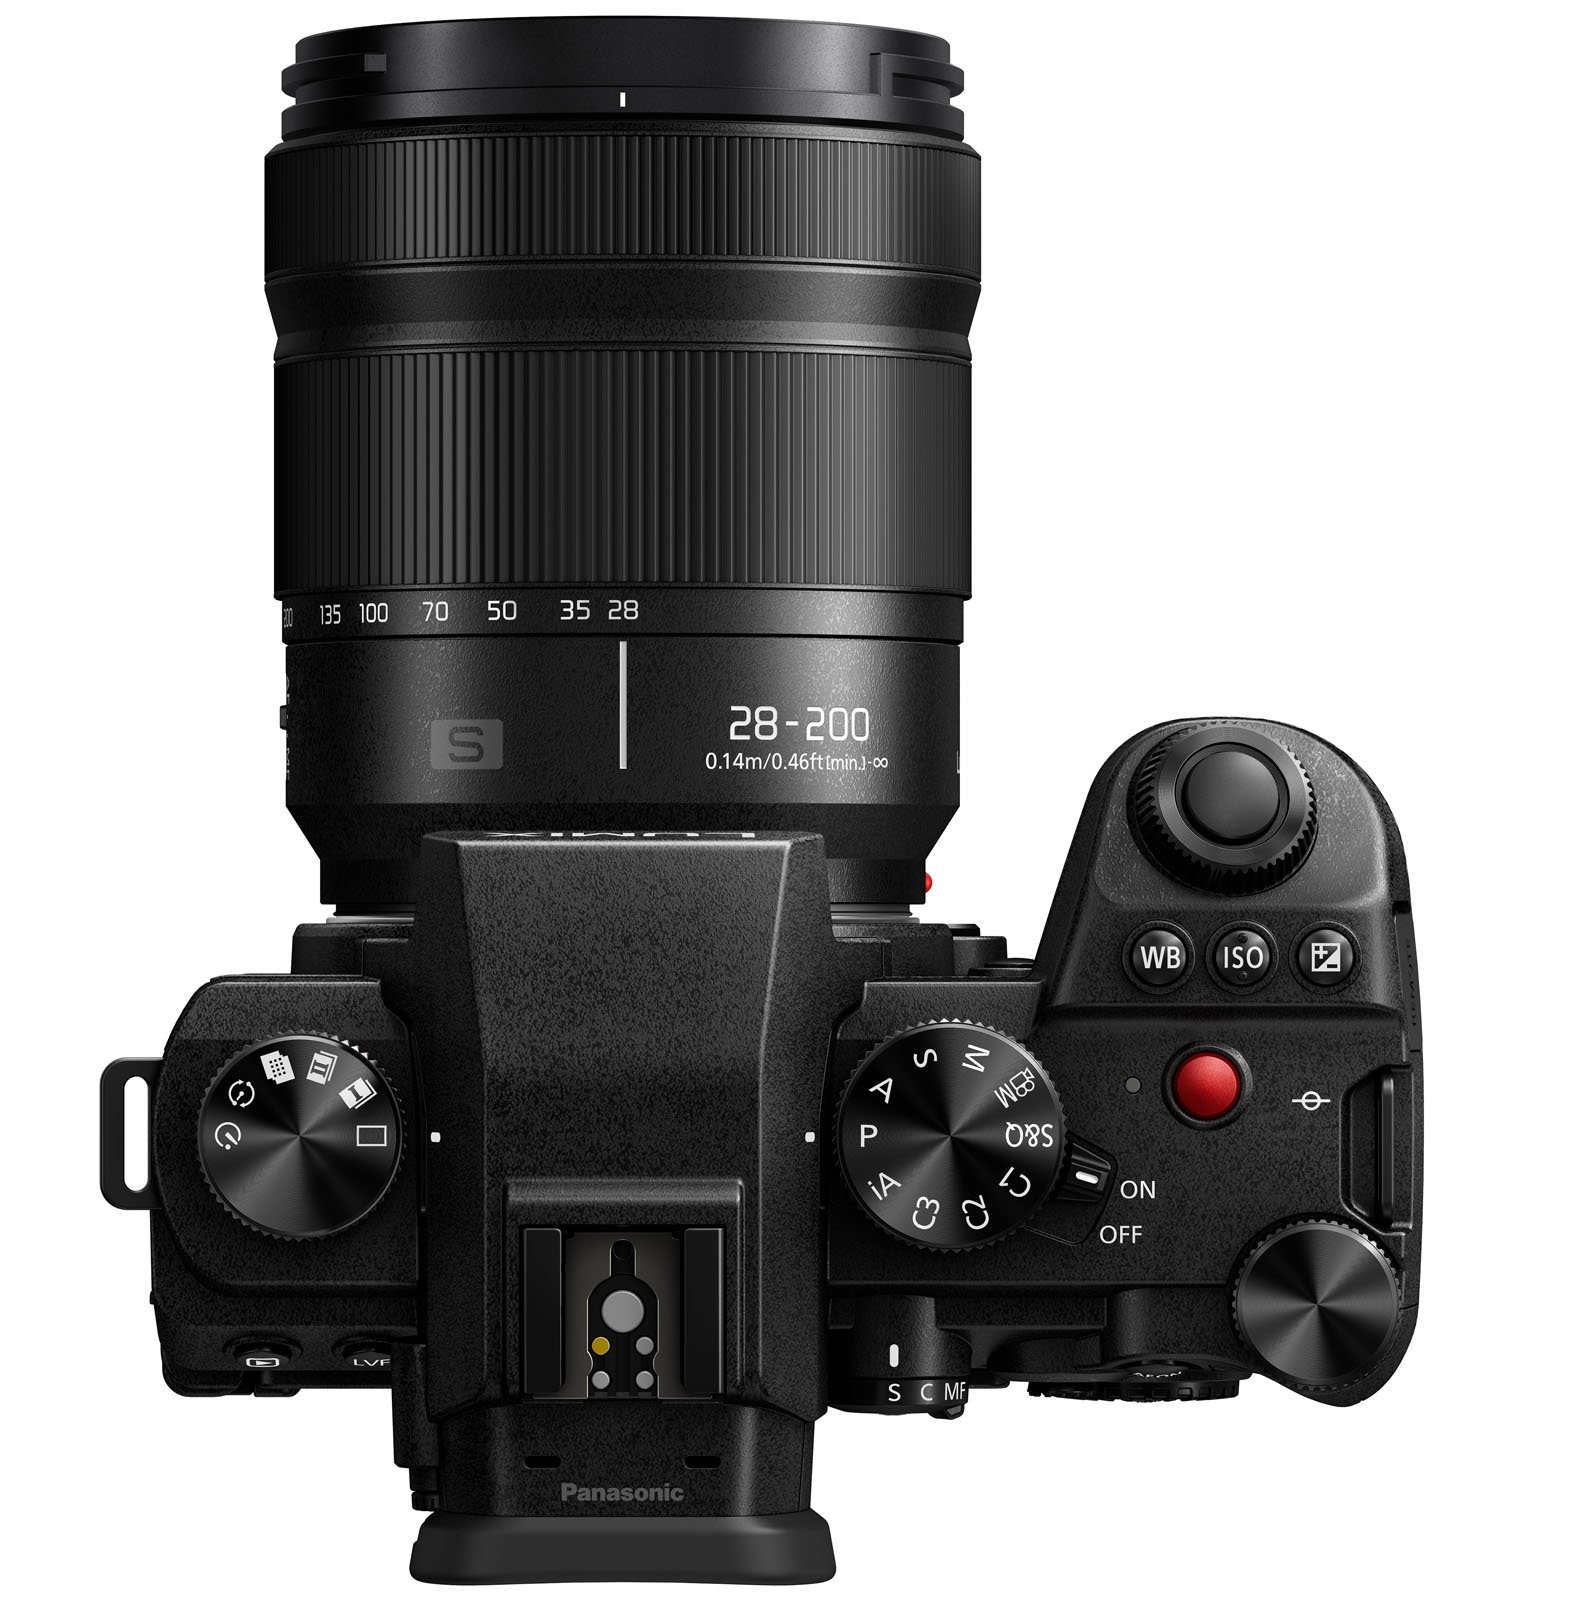 Panasonic Lumix S 28-200mm f/4-7.1 Macro O.I.S. all-in-one zoom lens for full-frame mirrorless L-Mount cameras